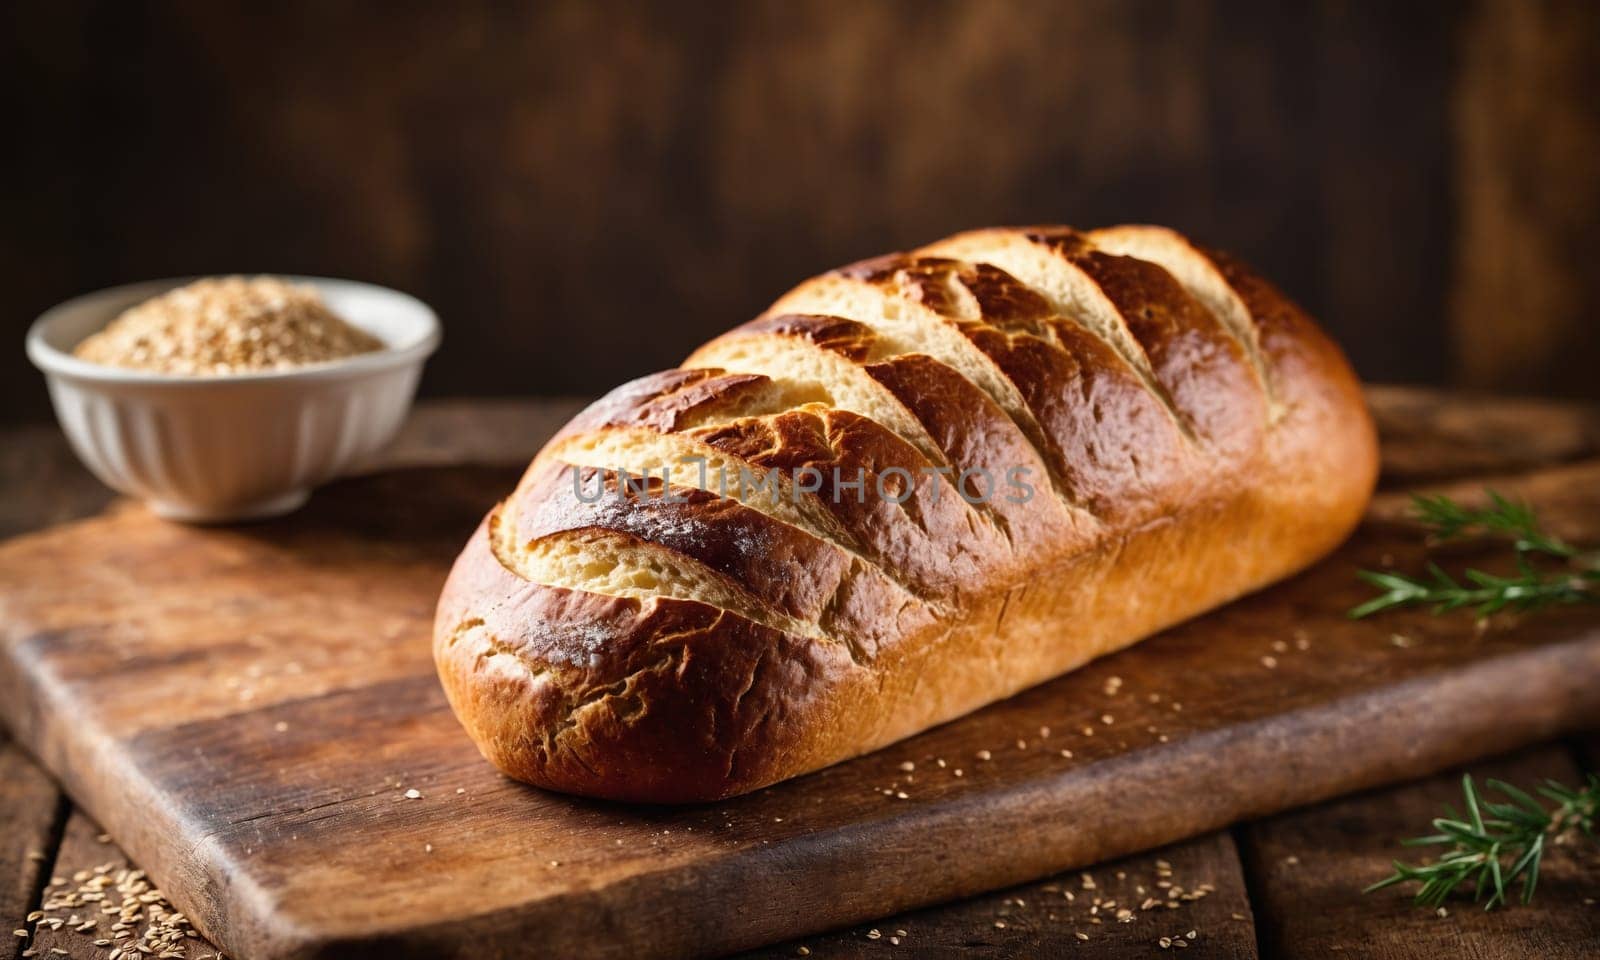 A staple food, a loaf of sourdough bread, is resting on a wooden cutting board. It is a key ingredient in many recipes and a popular choice for cooking